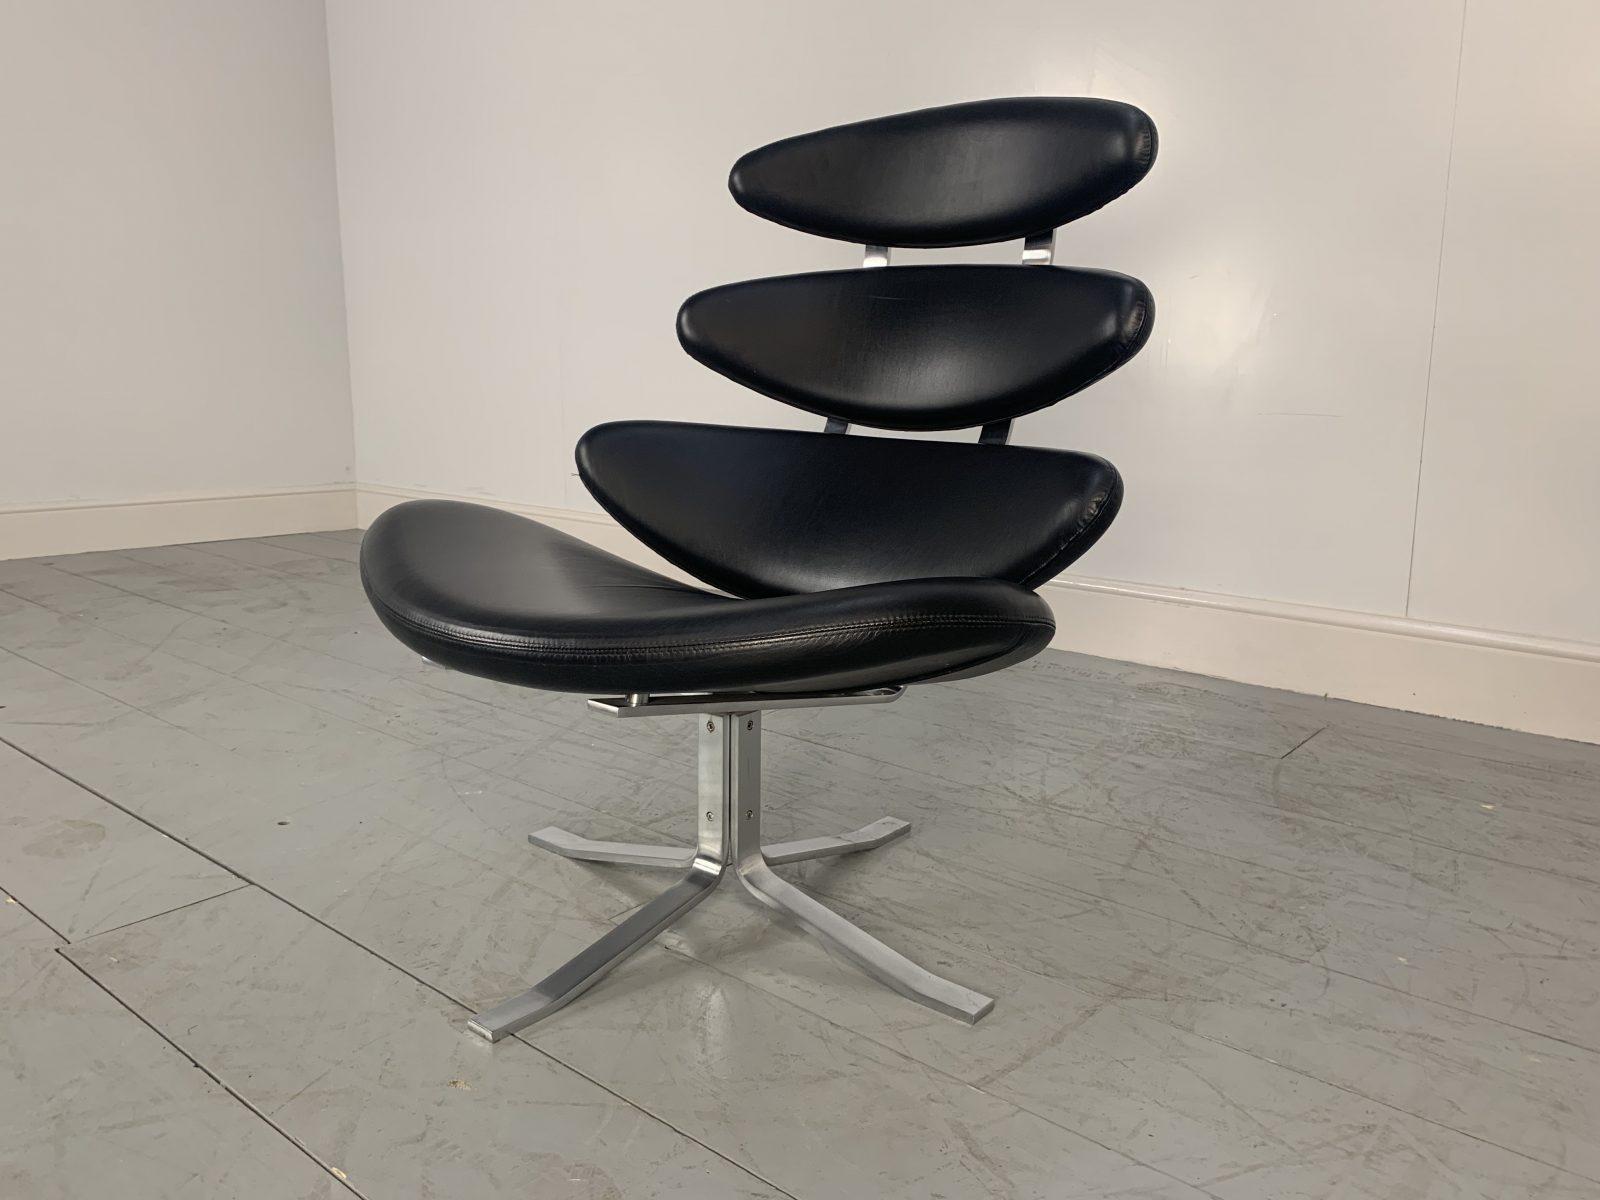 Hello friends, and welcome to Lord Browns Furniture.

On offer on this occasion is a rare, striking “EJ5 Corona” Chair dressed in Black “Apache” Leather, from the world-renown Danish furniture house of Erik Jorgensen.

As you will no doubt be